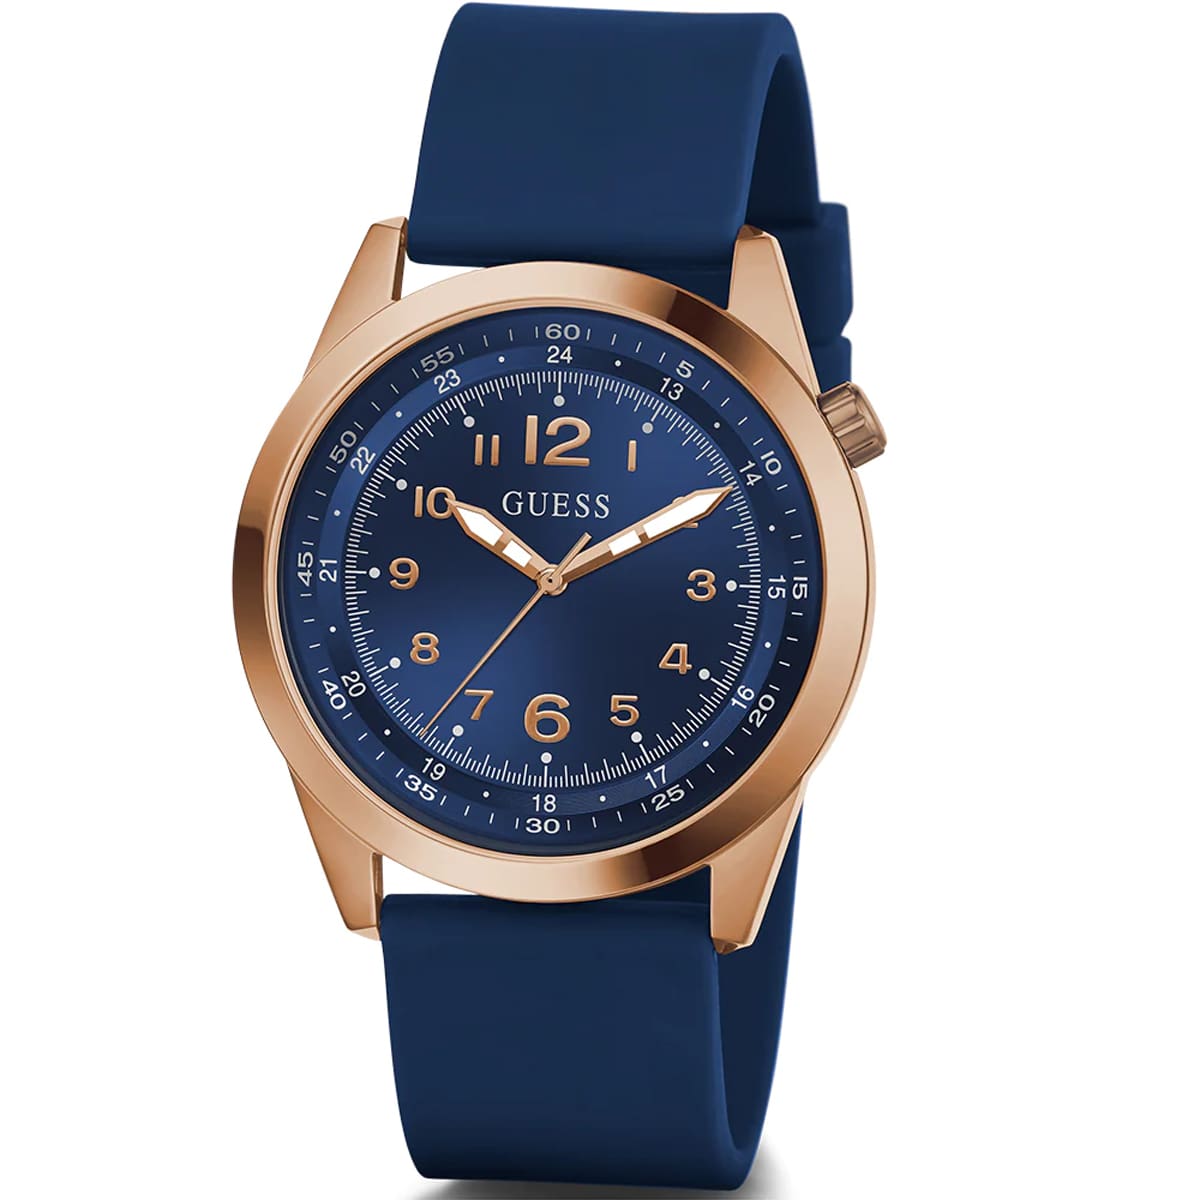 MONTRE GUESS MAX HOMME SILICONE